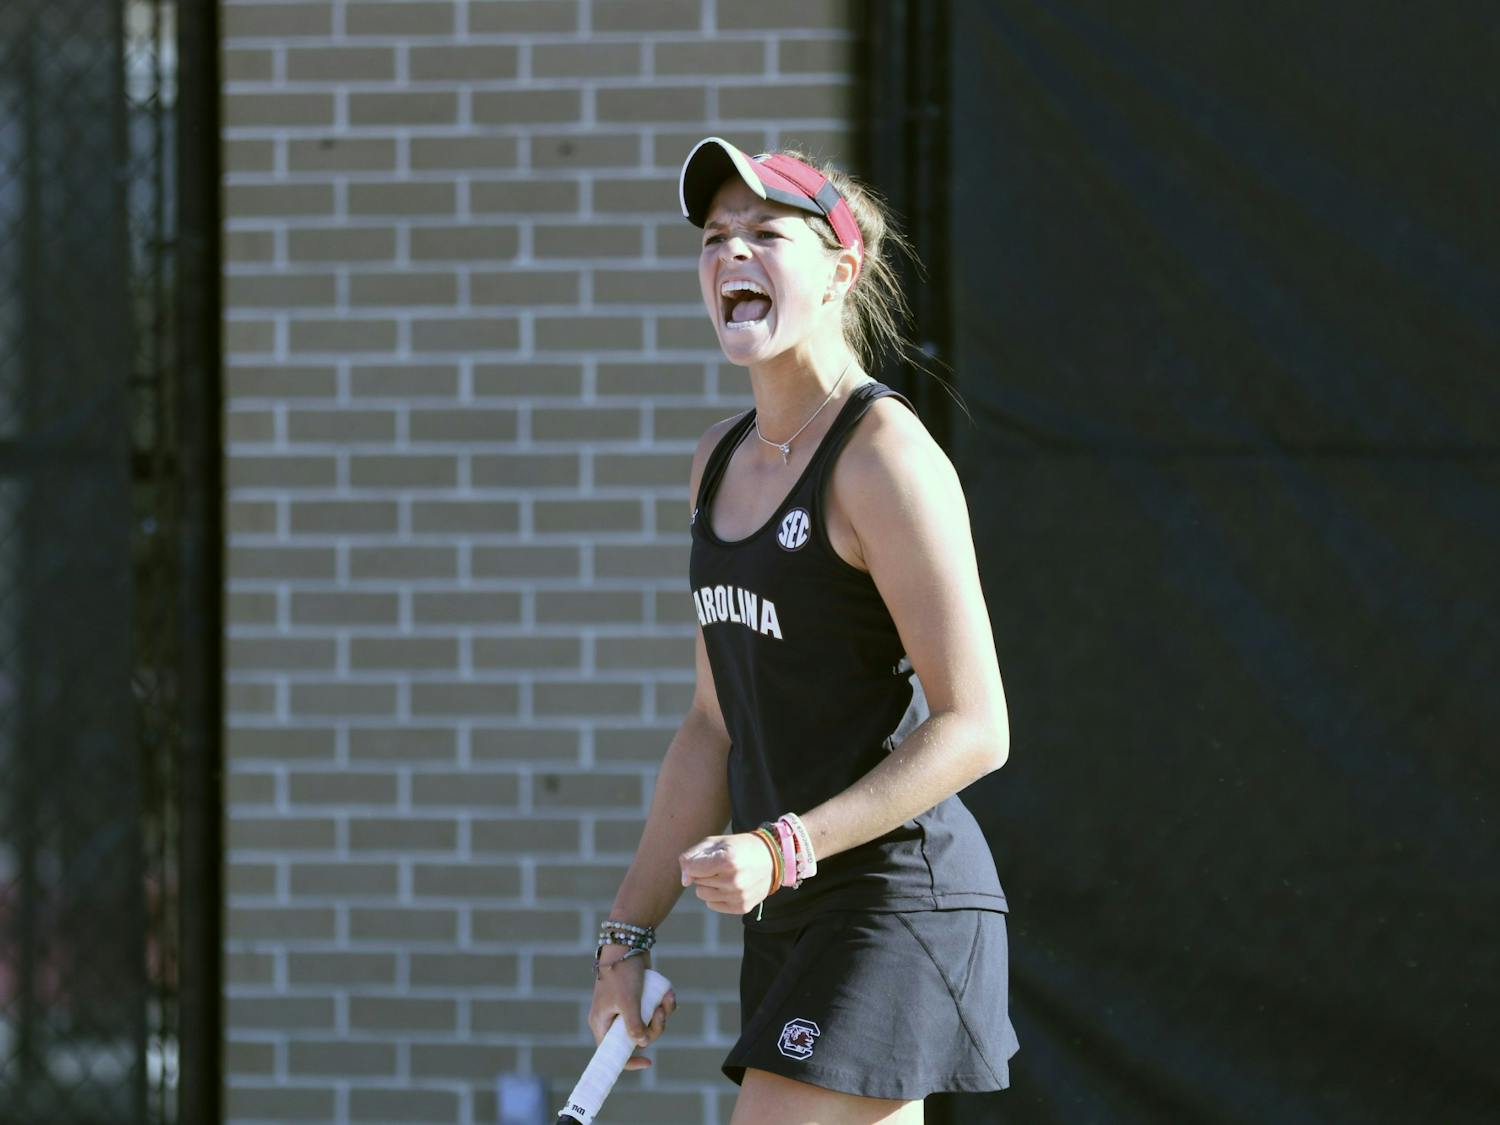 Freshman Emma Shelton celebrates her victory after defeating her opponent 6-3, 6-3. Overall, the Gamecocks followed this trend and beat Clemson 6-1.
